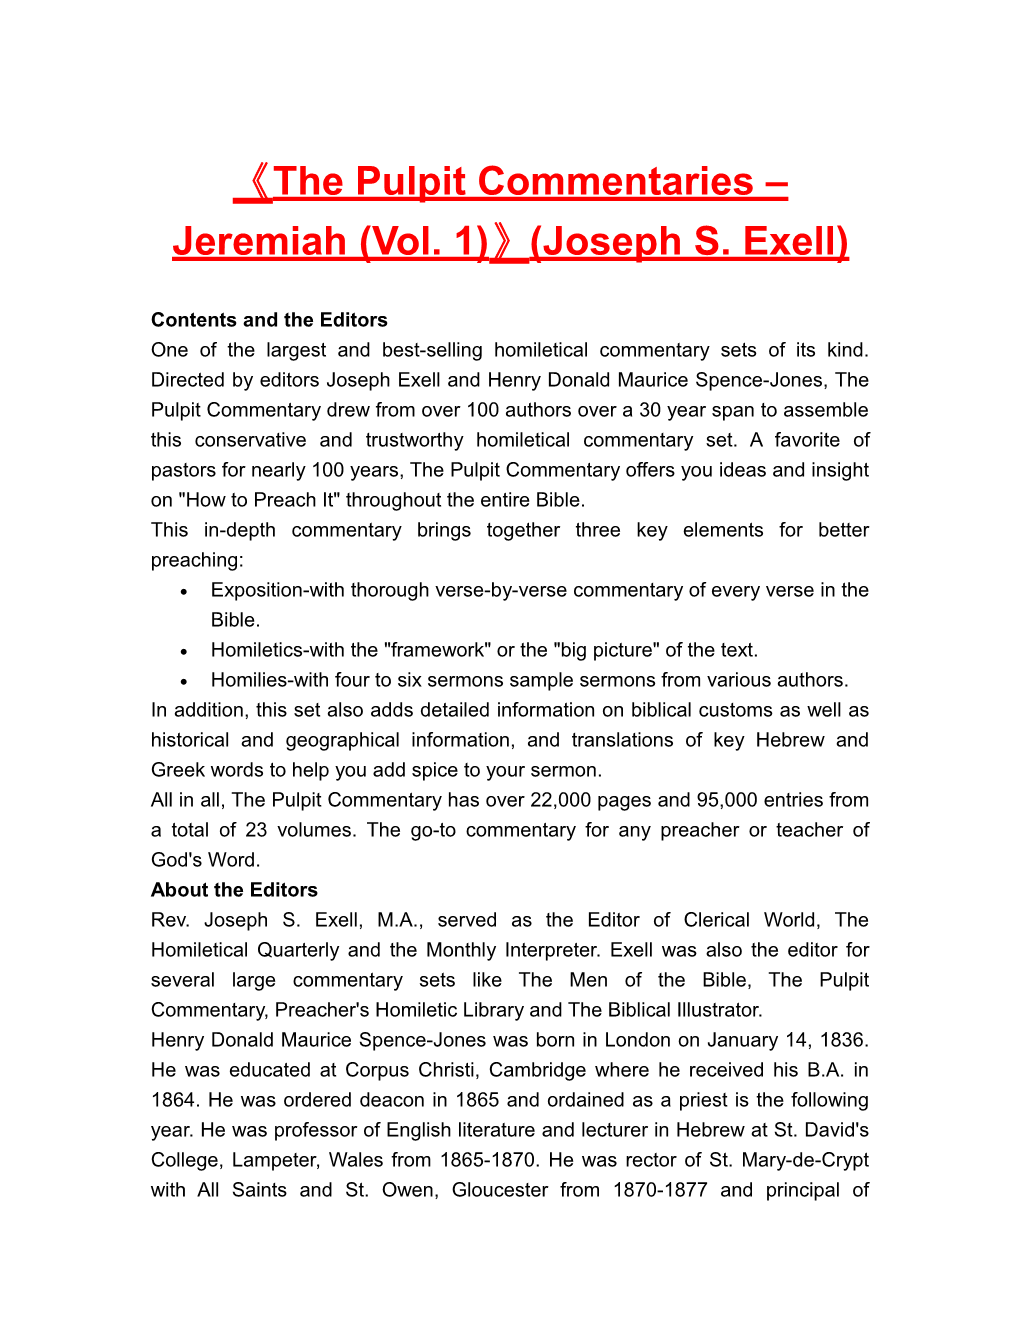 The Pulpit Commentaries Jeremiah (Vol. 1) (Joseph S. Exell)